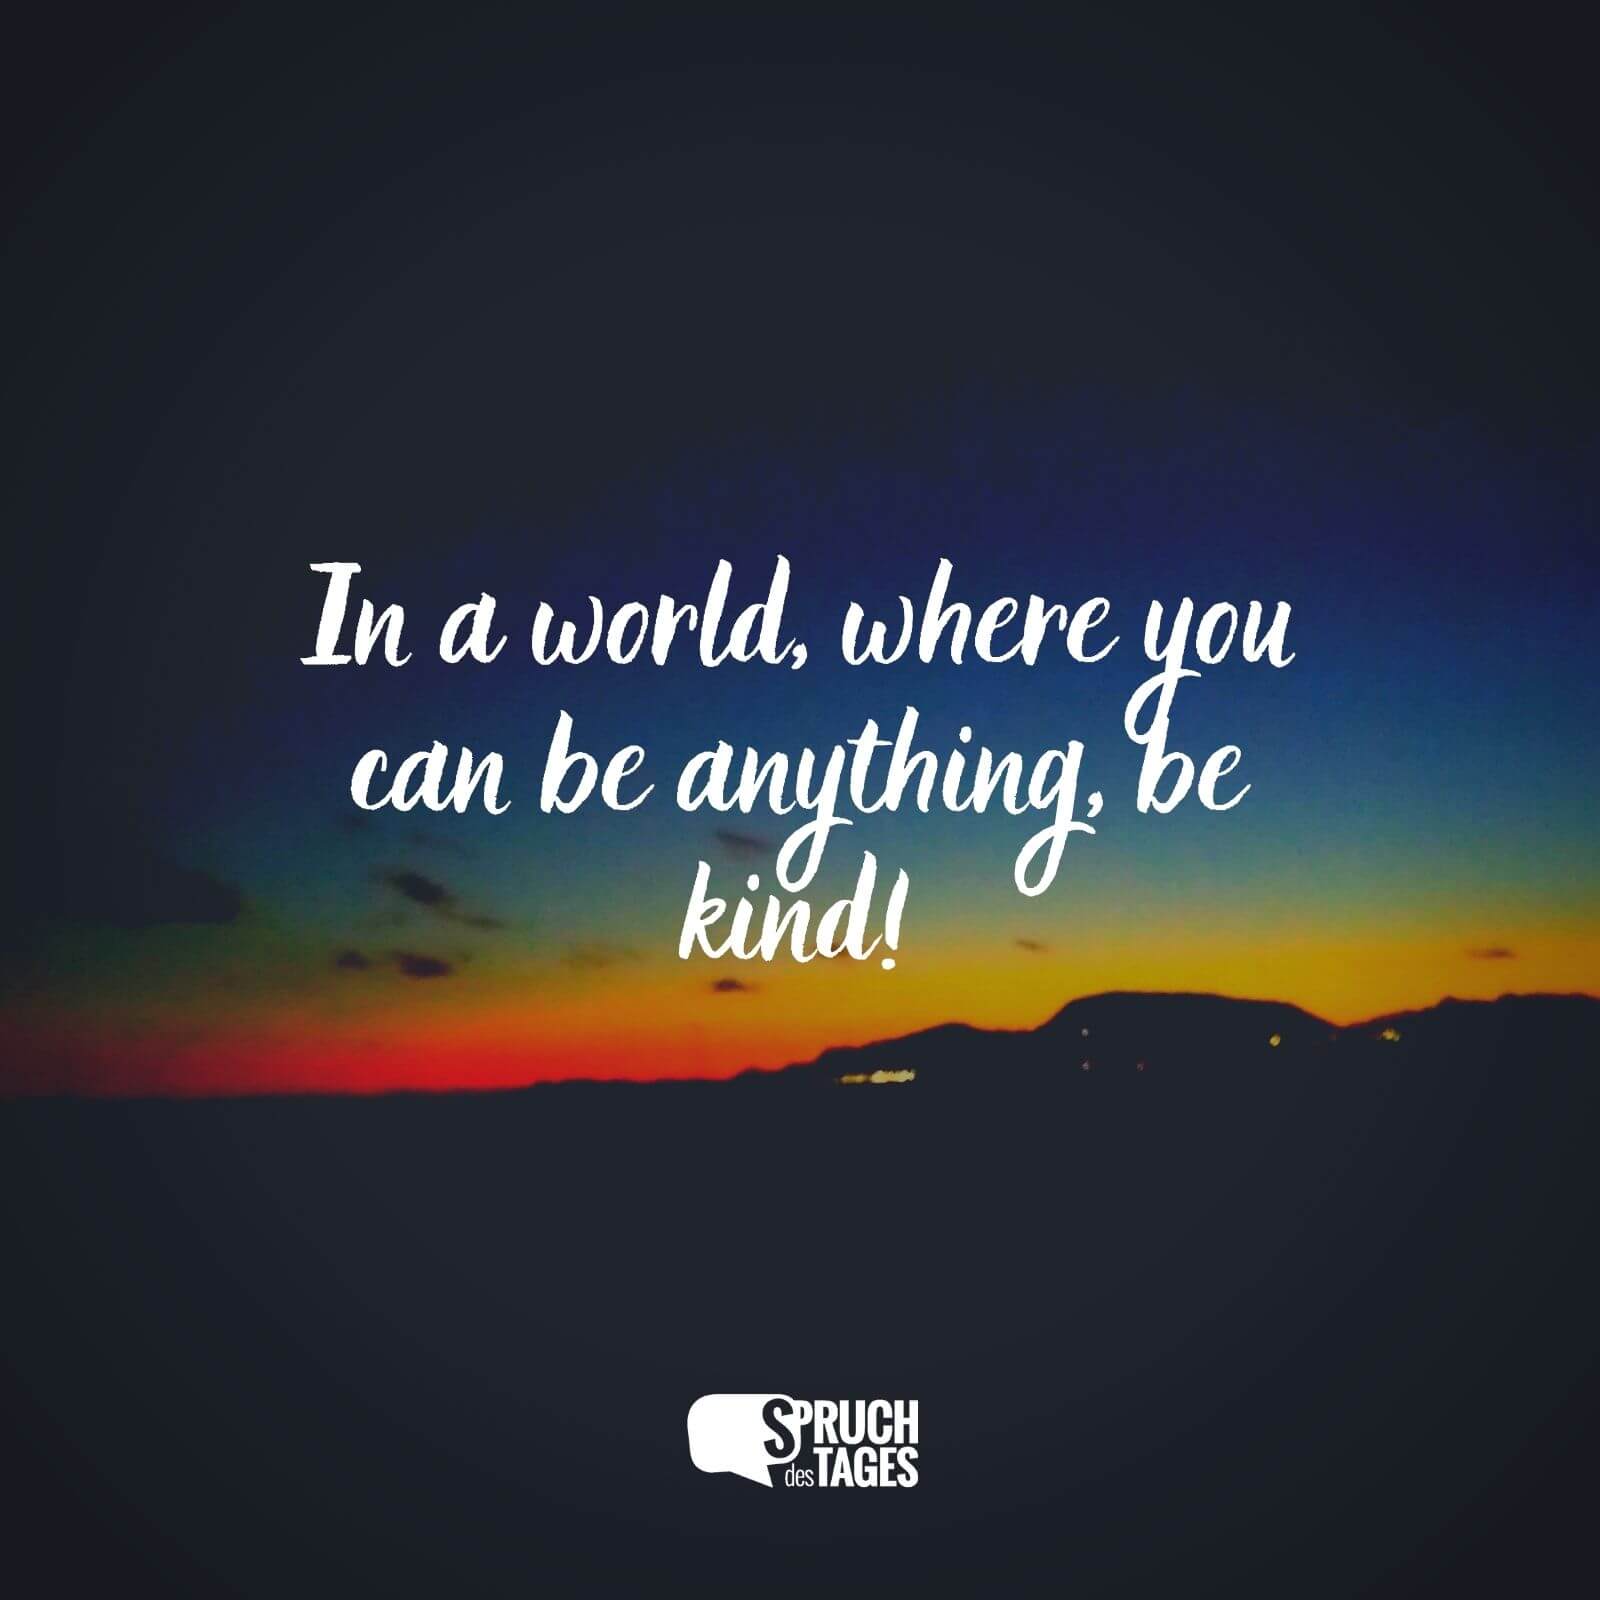 In a world, where you can be anything, be kind! - Spruch des Tages